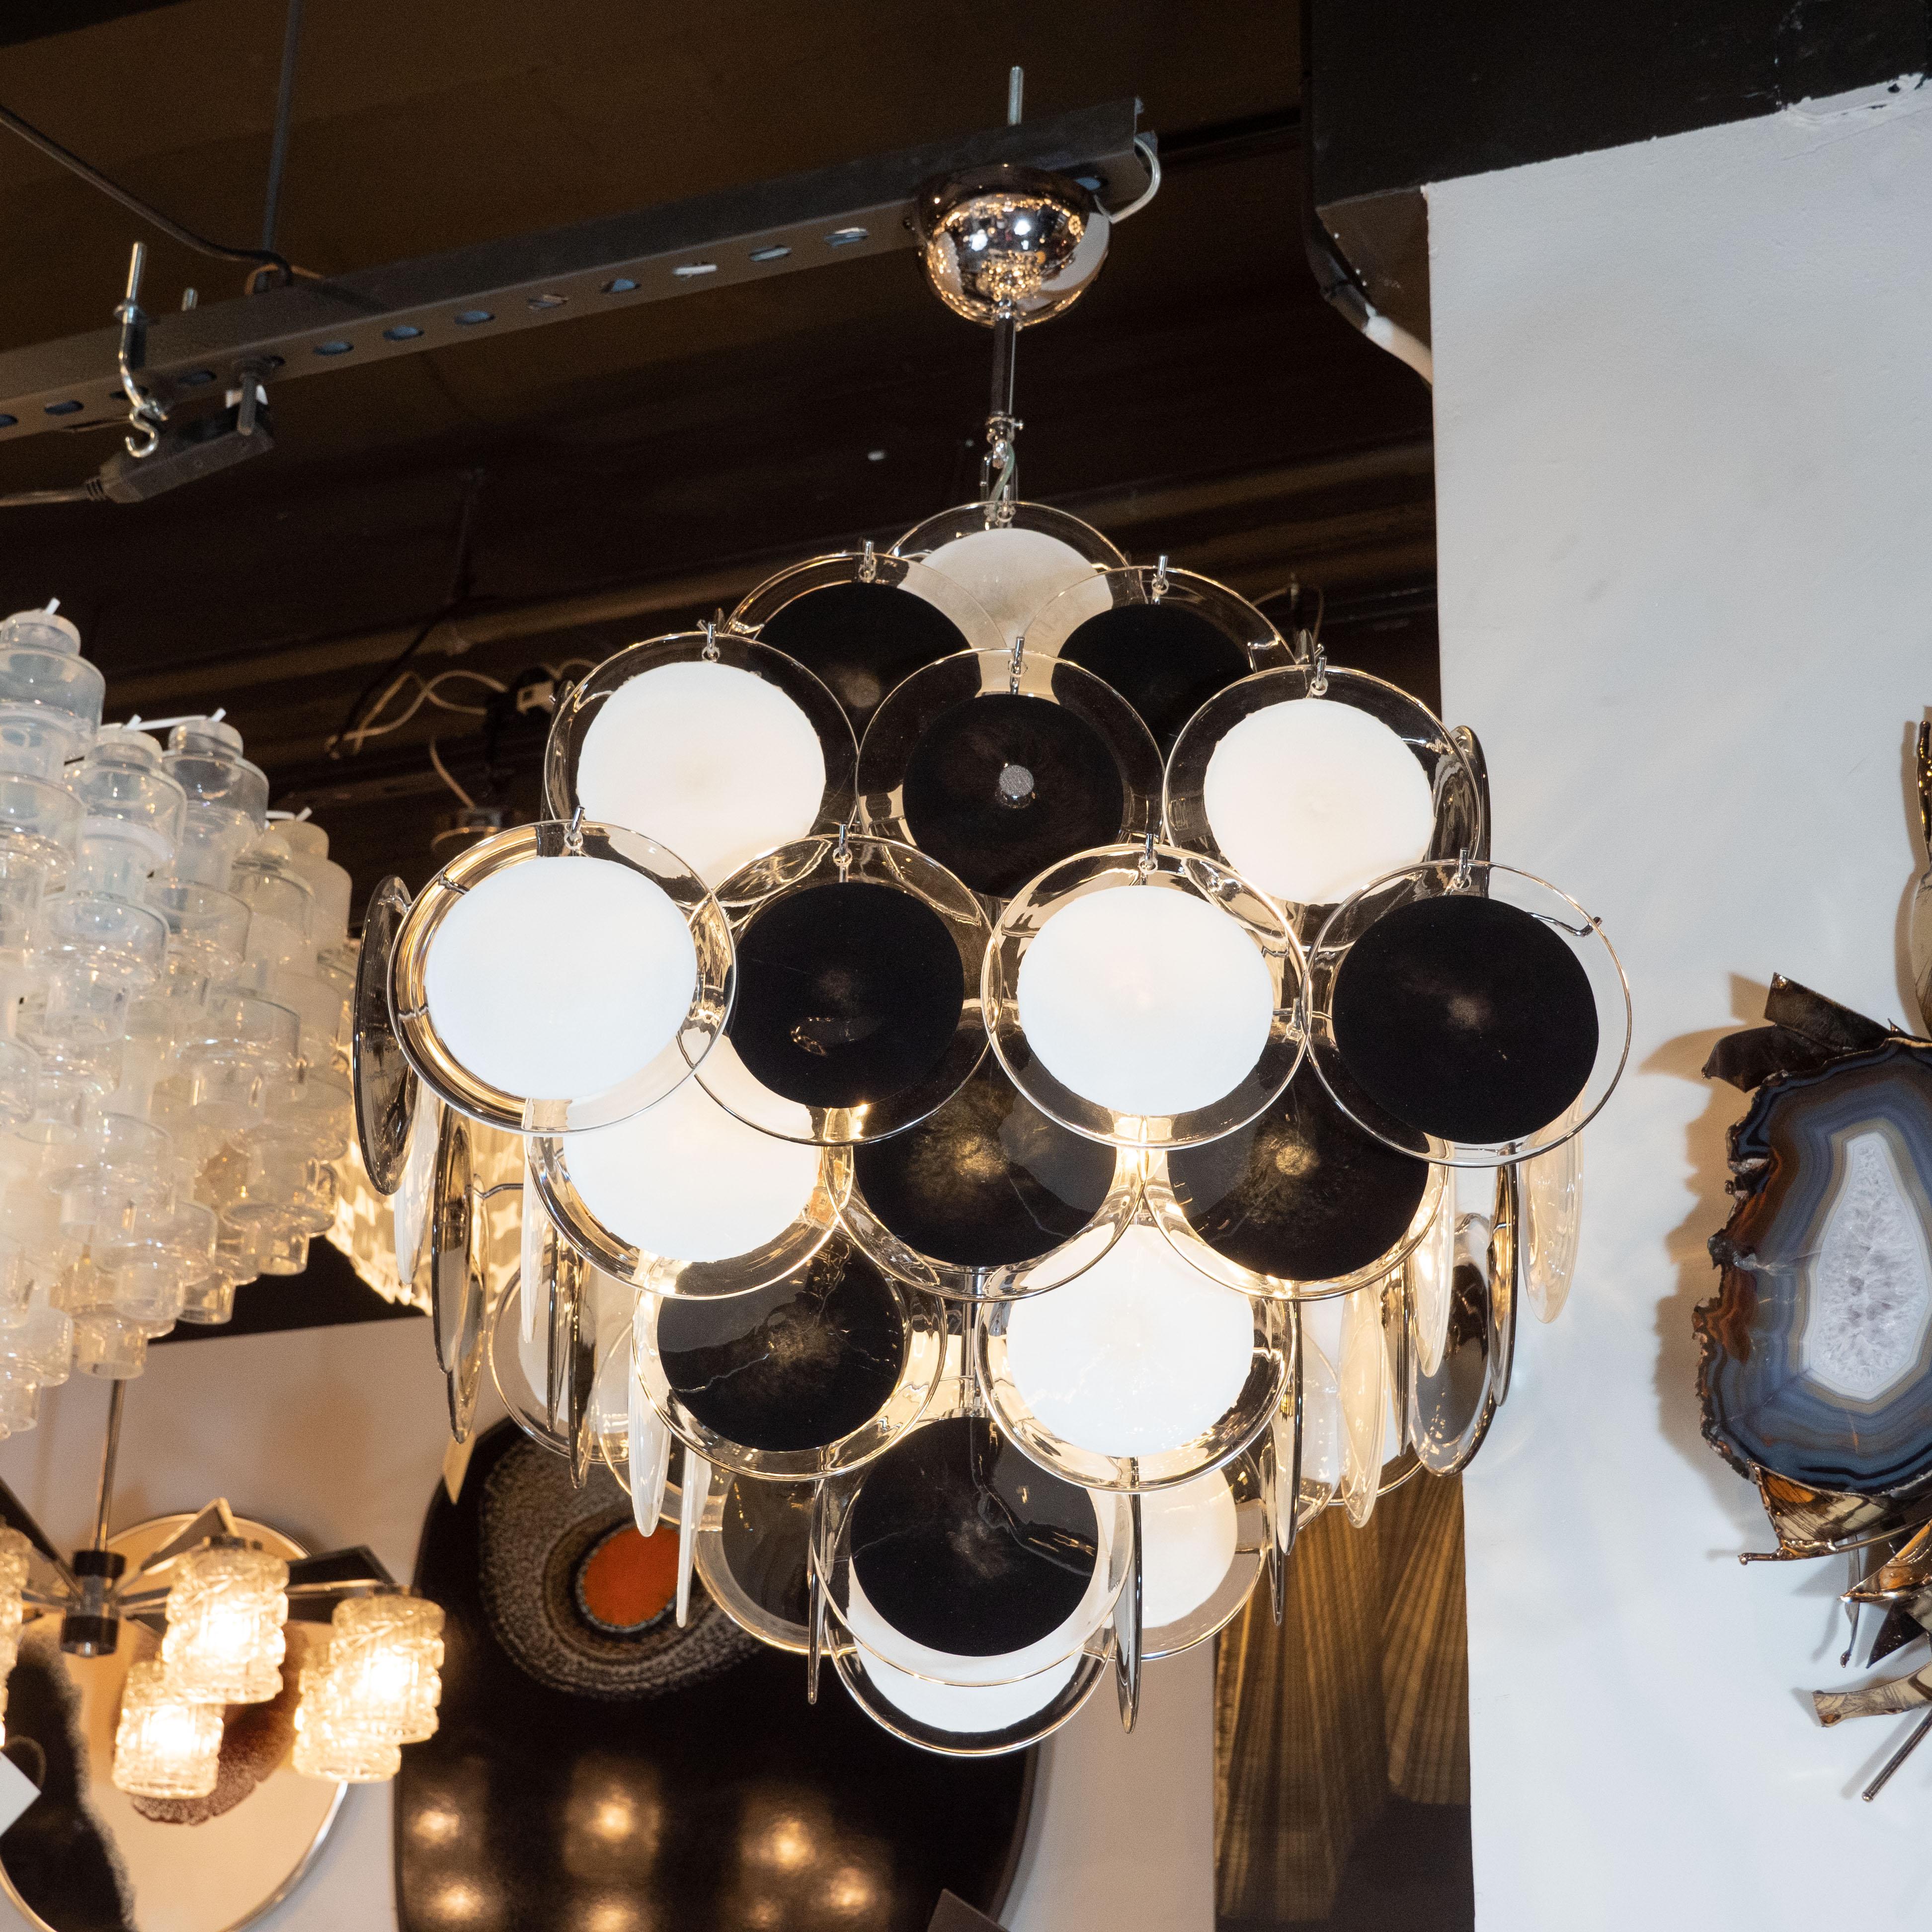 This elegant chandelier was realized in Murano, Italy, the island off the coast of Venice renowned for centuries for their superlative glass production. It features a pagoda style body, consisting of an abundance of Vistosi style discs with black